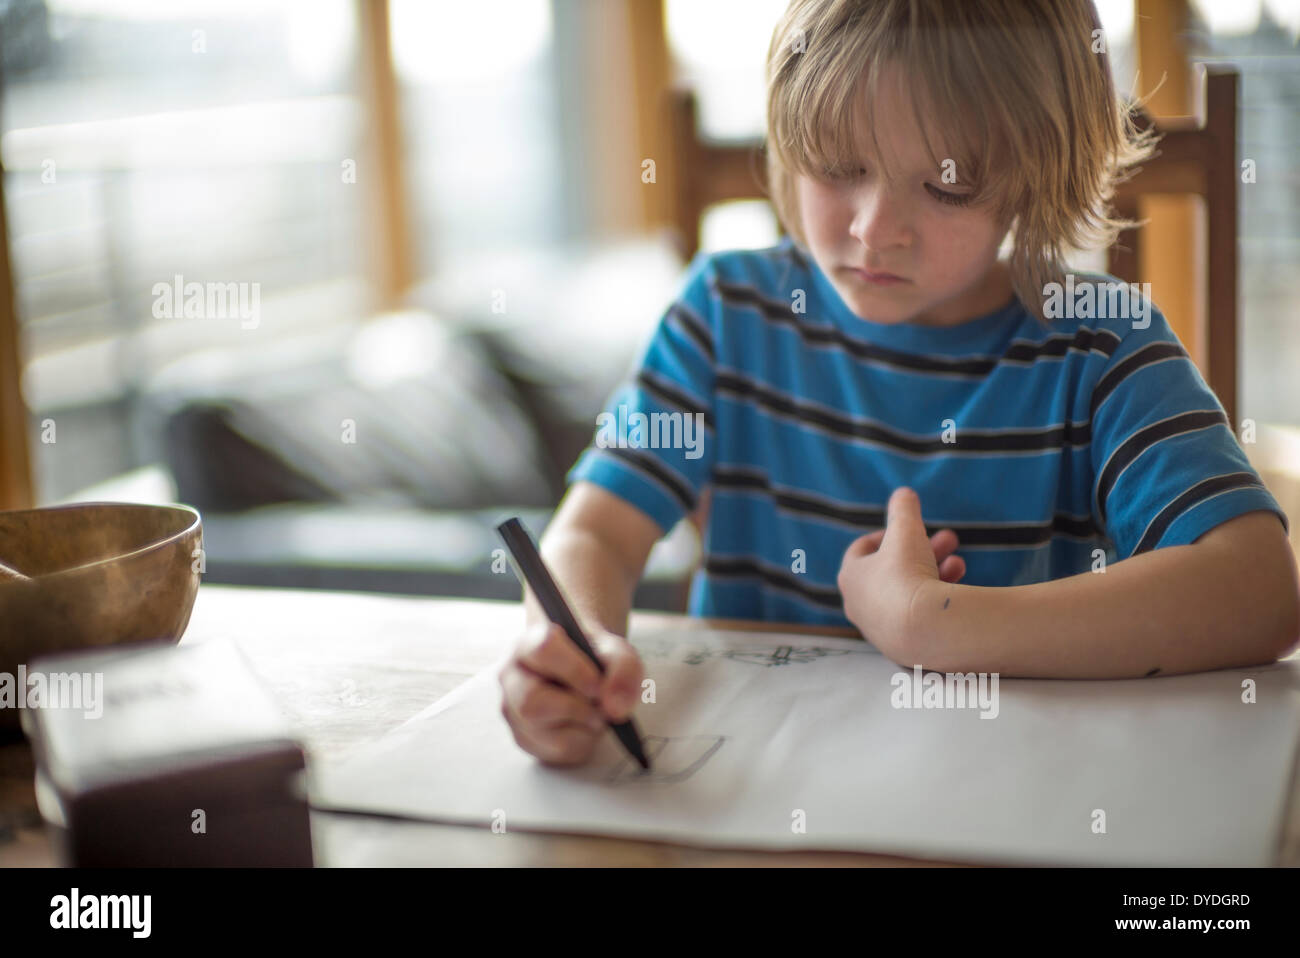 Seven year old boy drawing at the table. Stock Photo